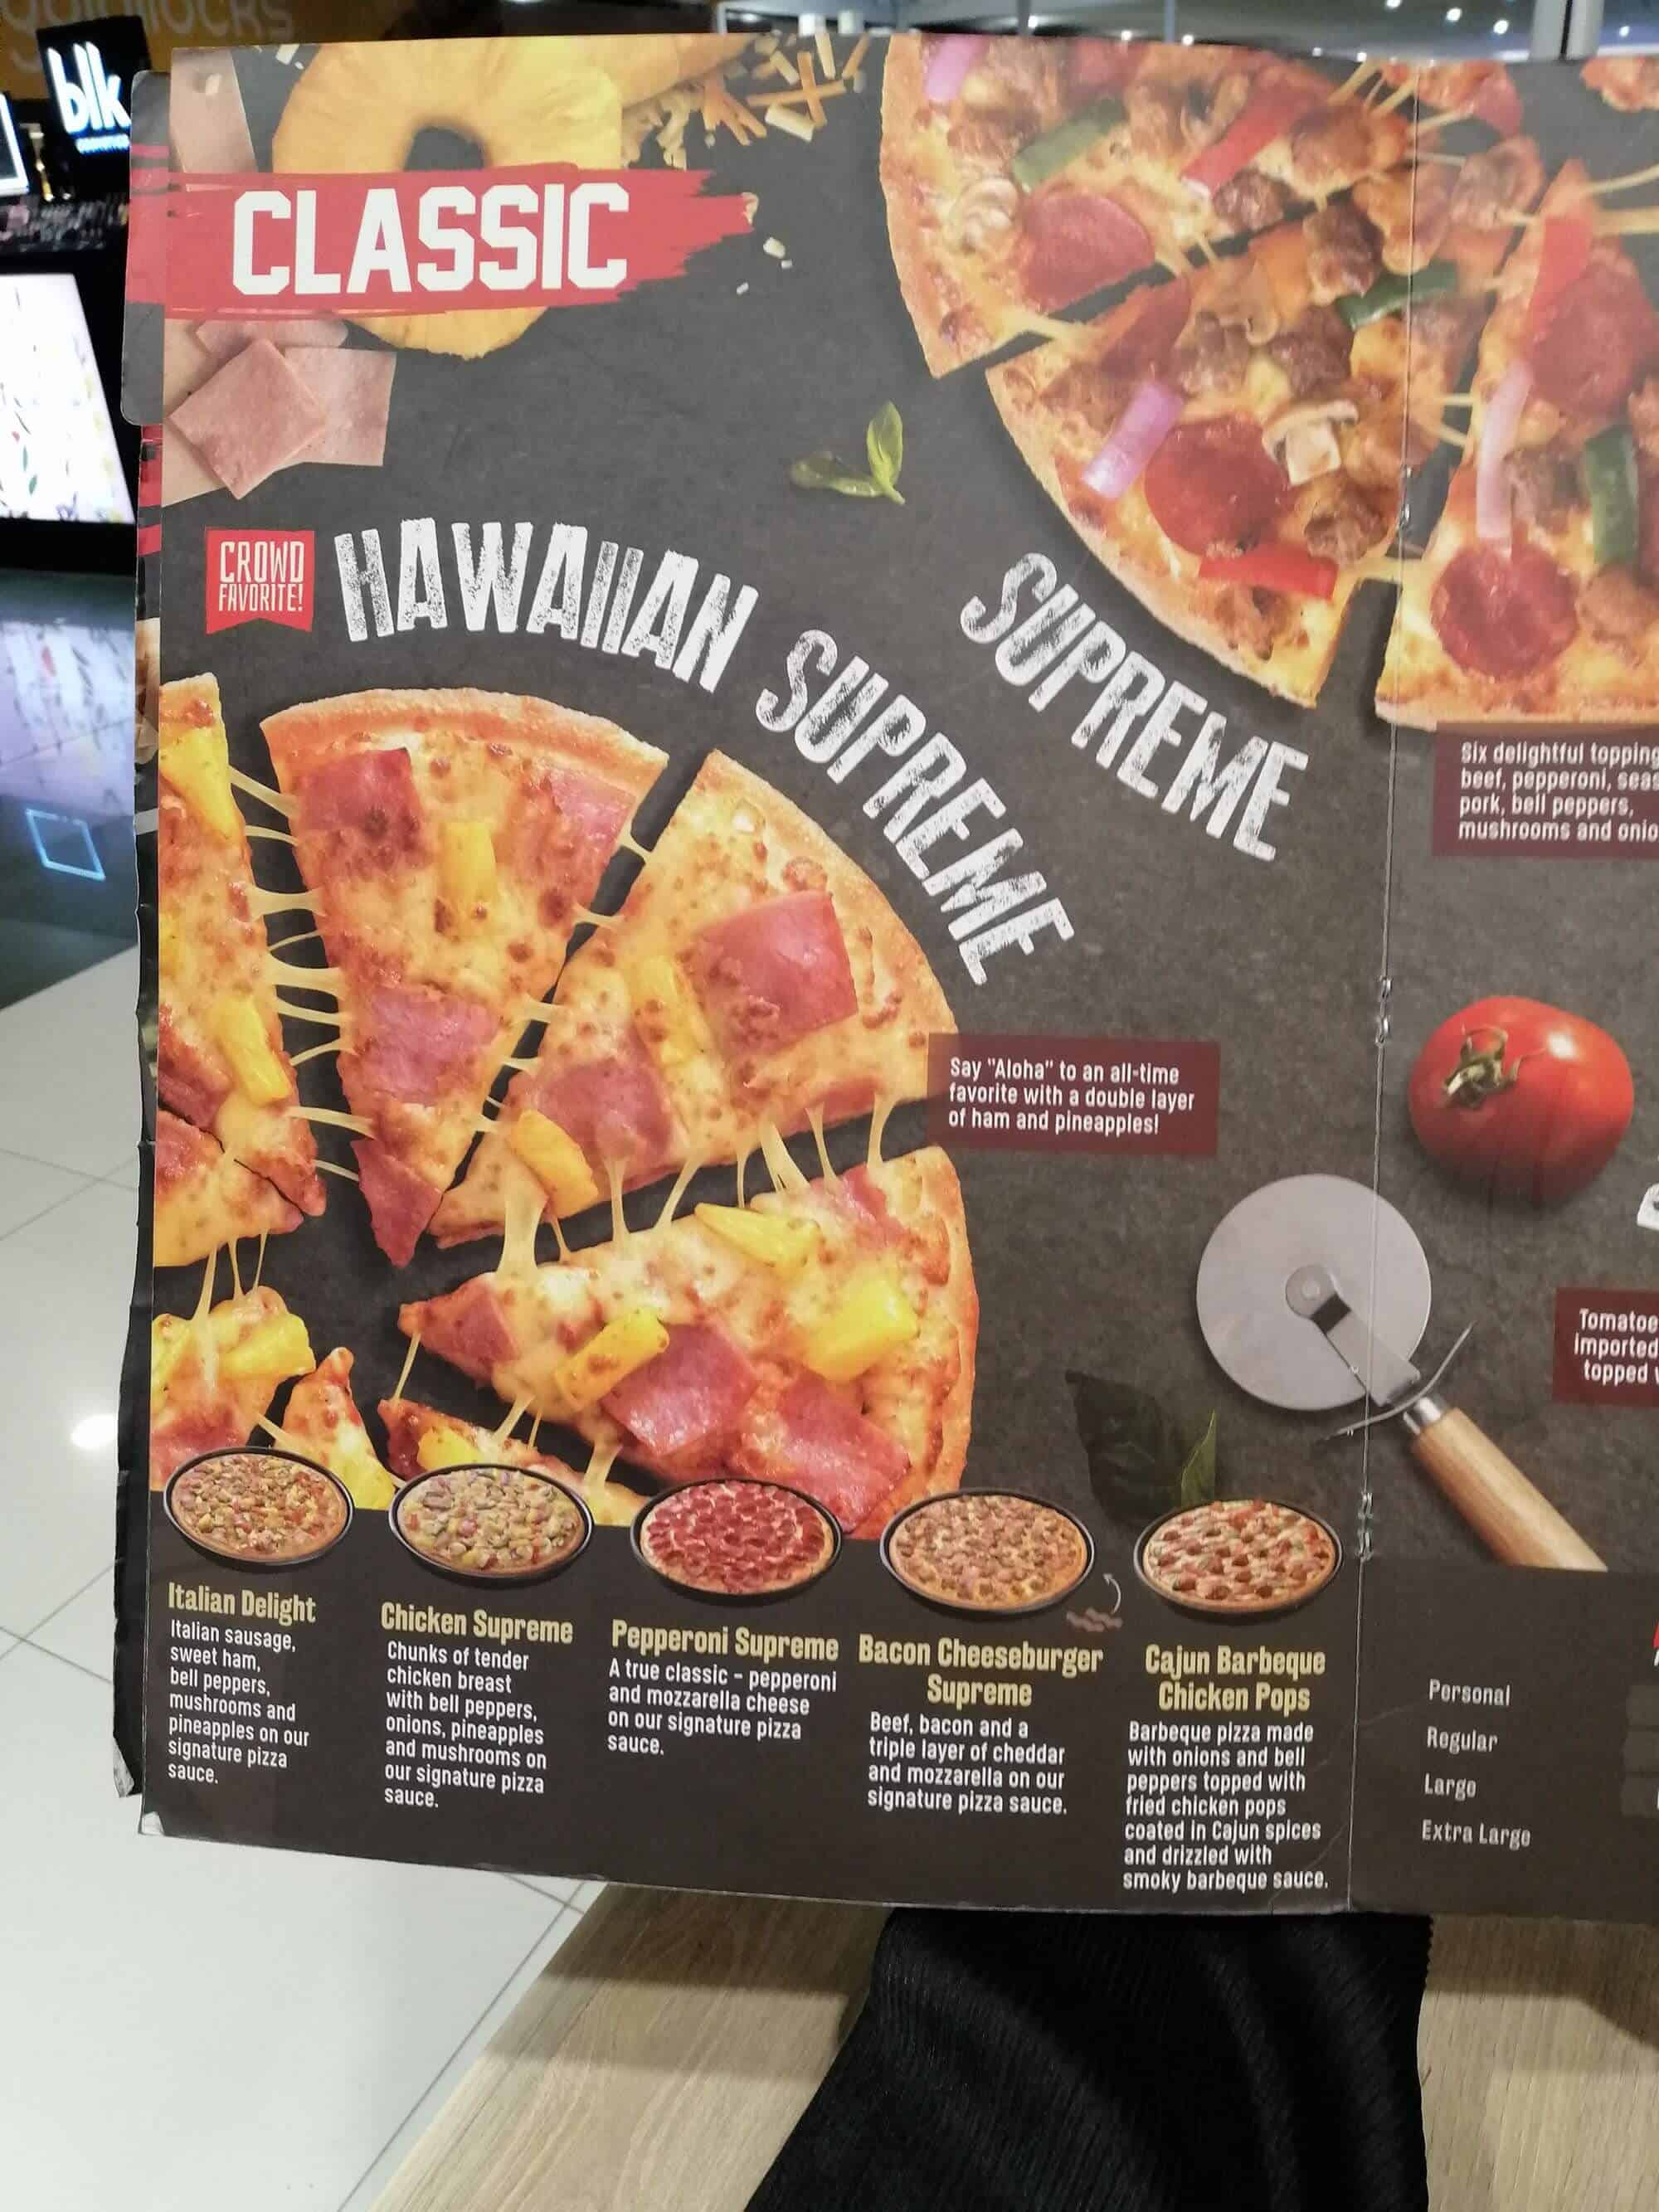 Menu And Prices Of Classic Pizzas At Pizza Hut